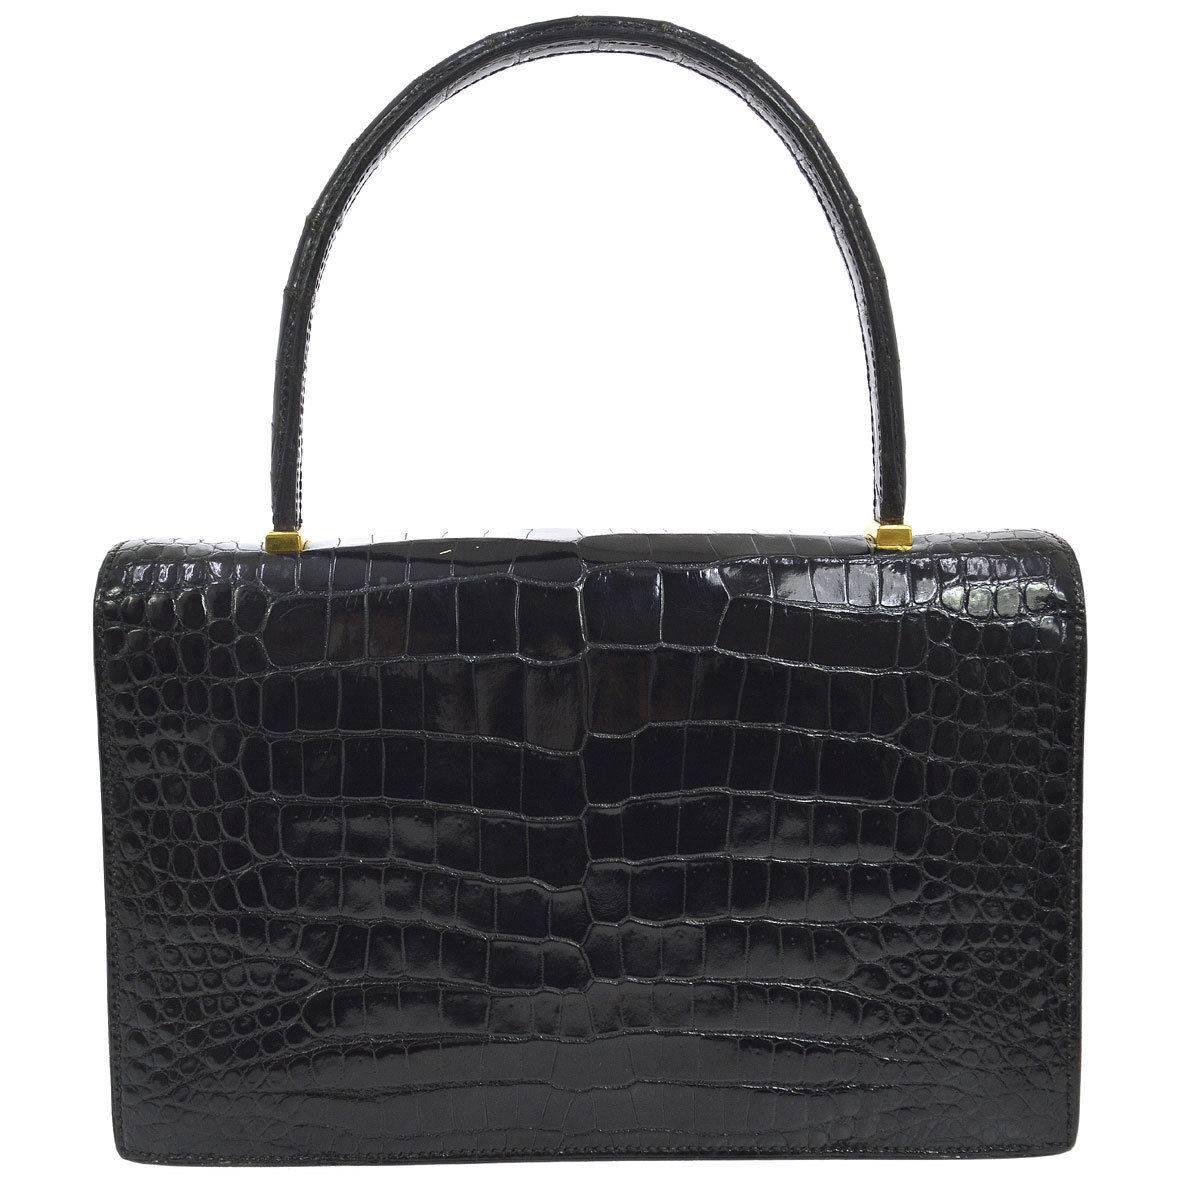 Hermes Rare Black Crocodile Exotic Leather Gold Emblem Evening Kelly Style Top Handle Satchel Bag

Crocodile leather
Gold tone hardware
Leather lining
Made in France
Handle drop 4.5